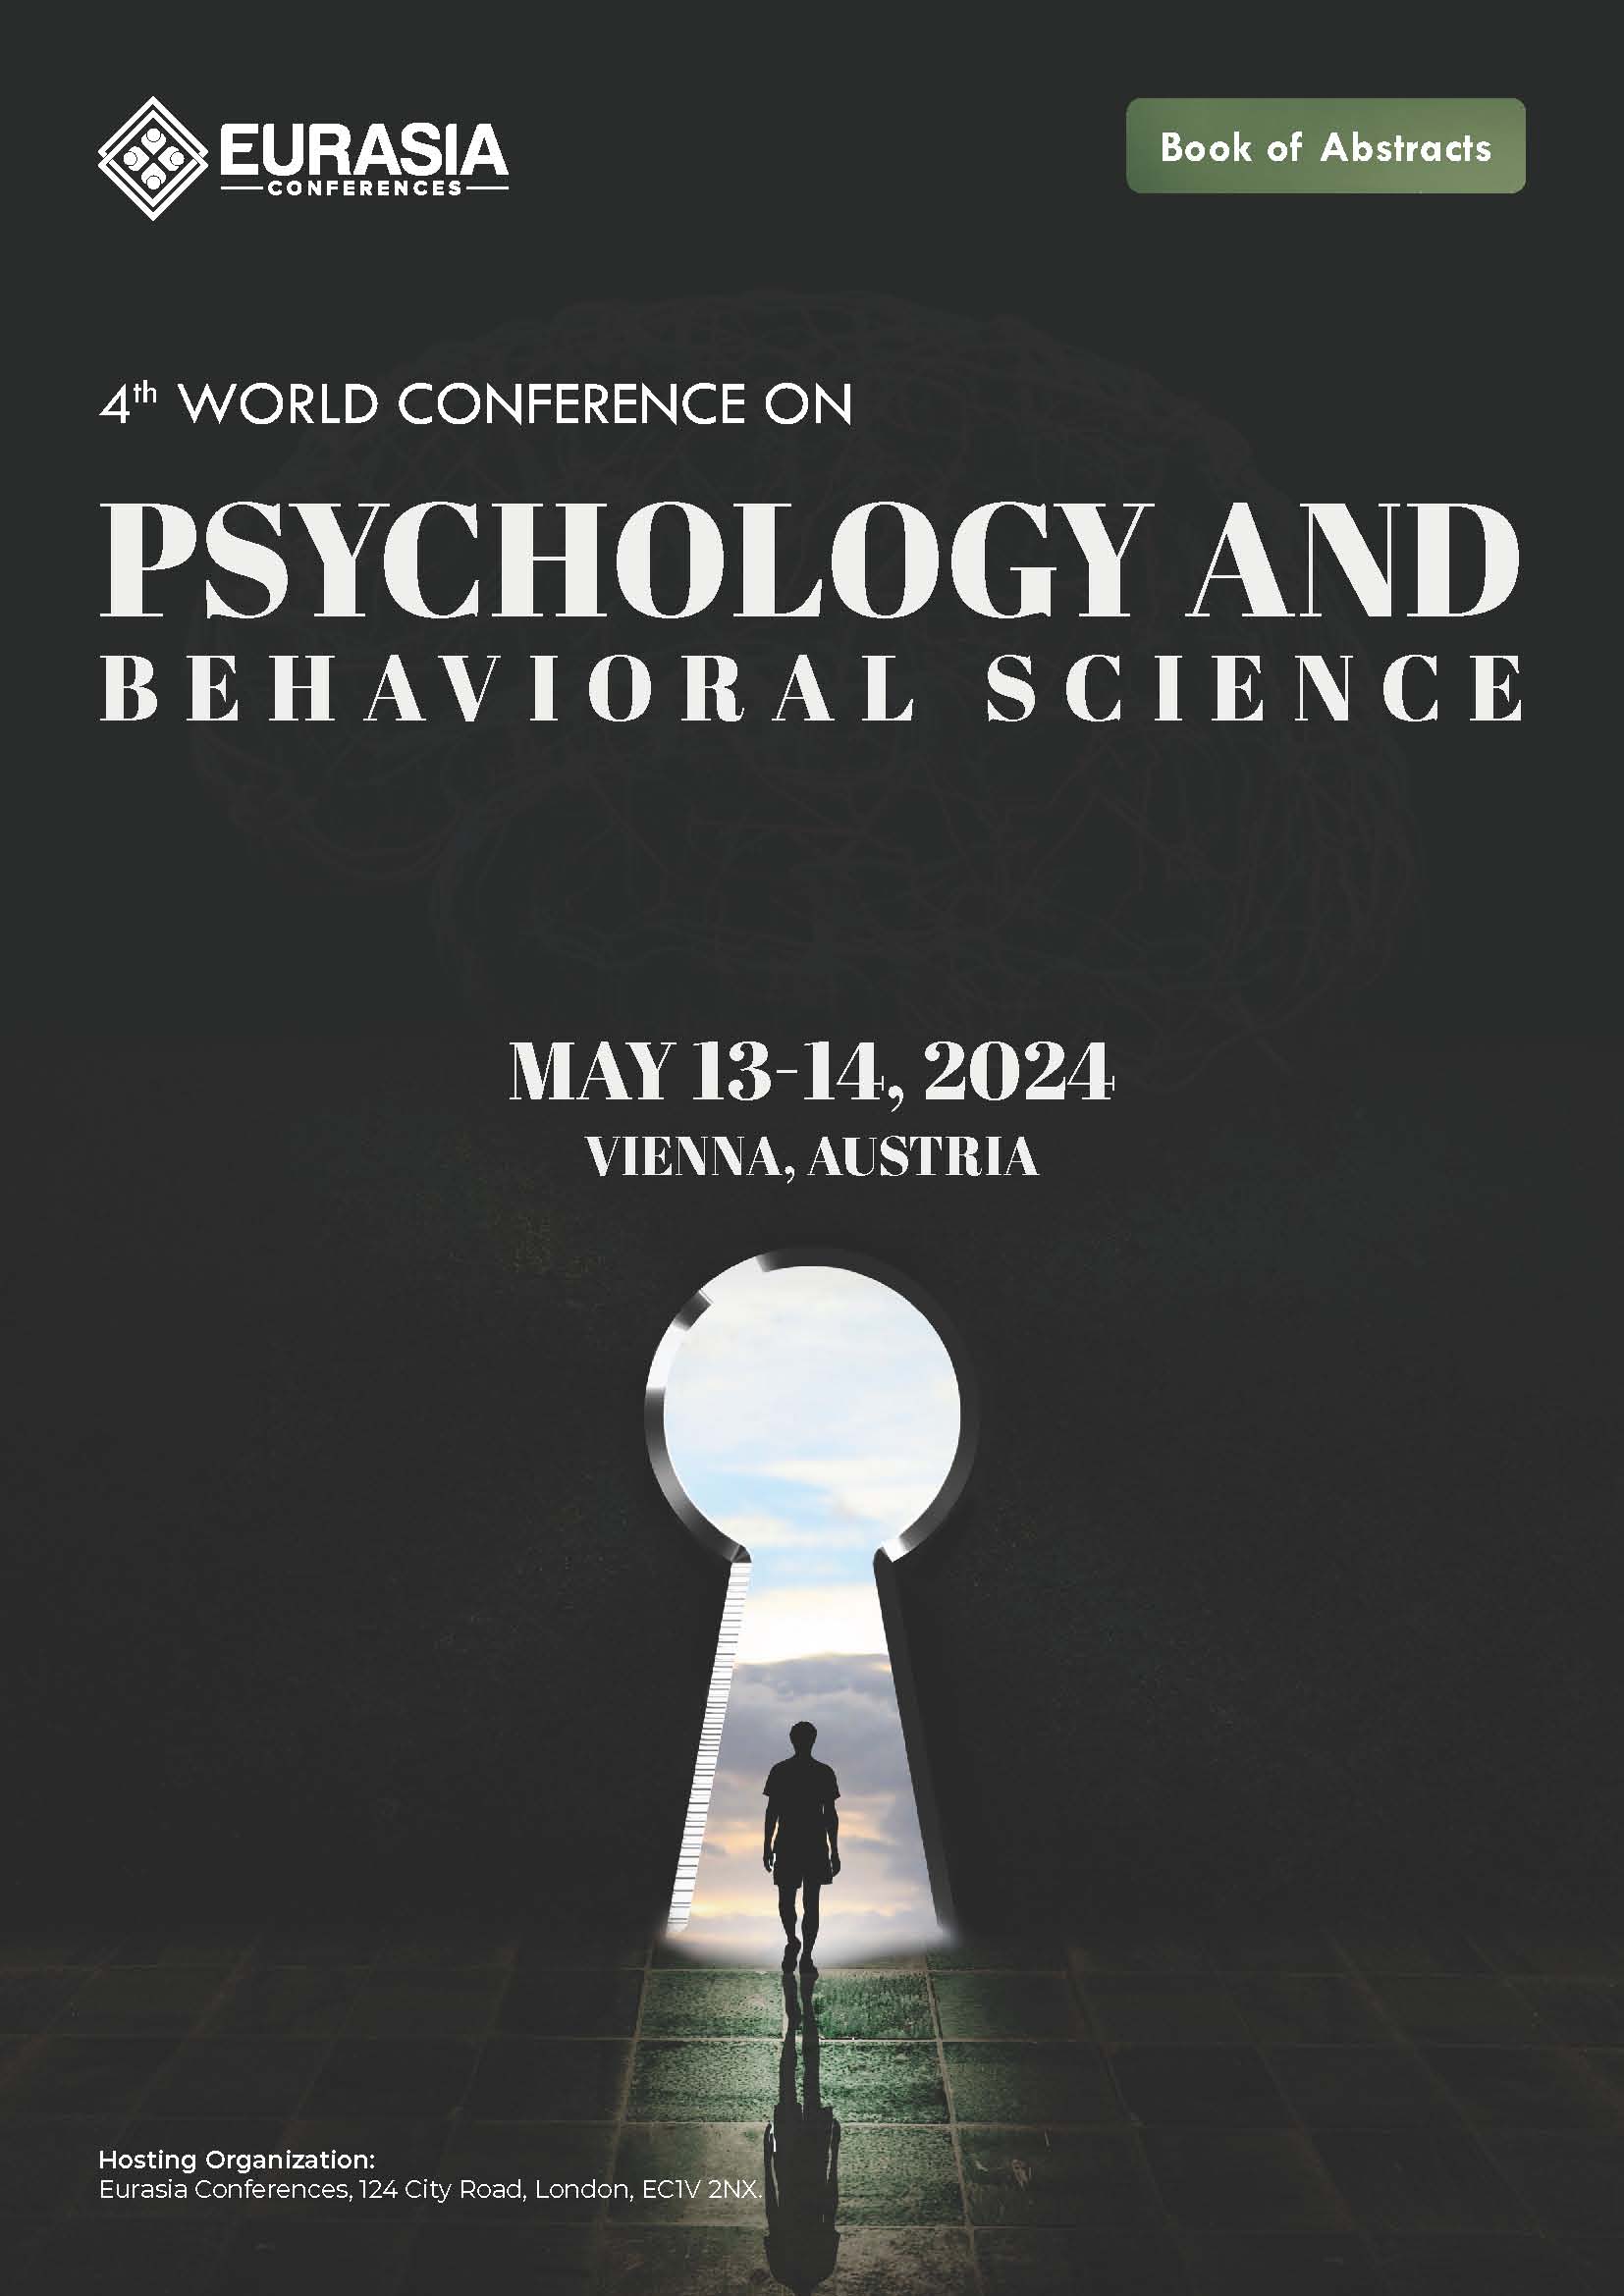 Abstracts of the 4th World Conference on Psychology and Behavioral Science